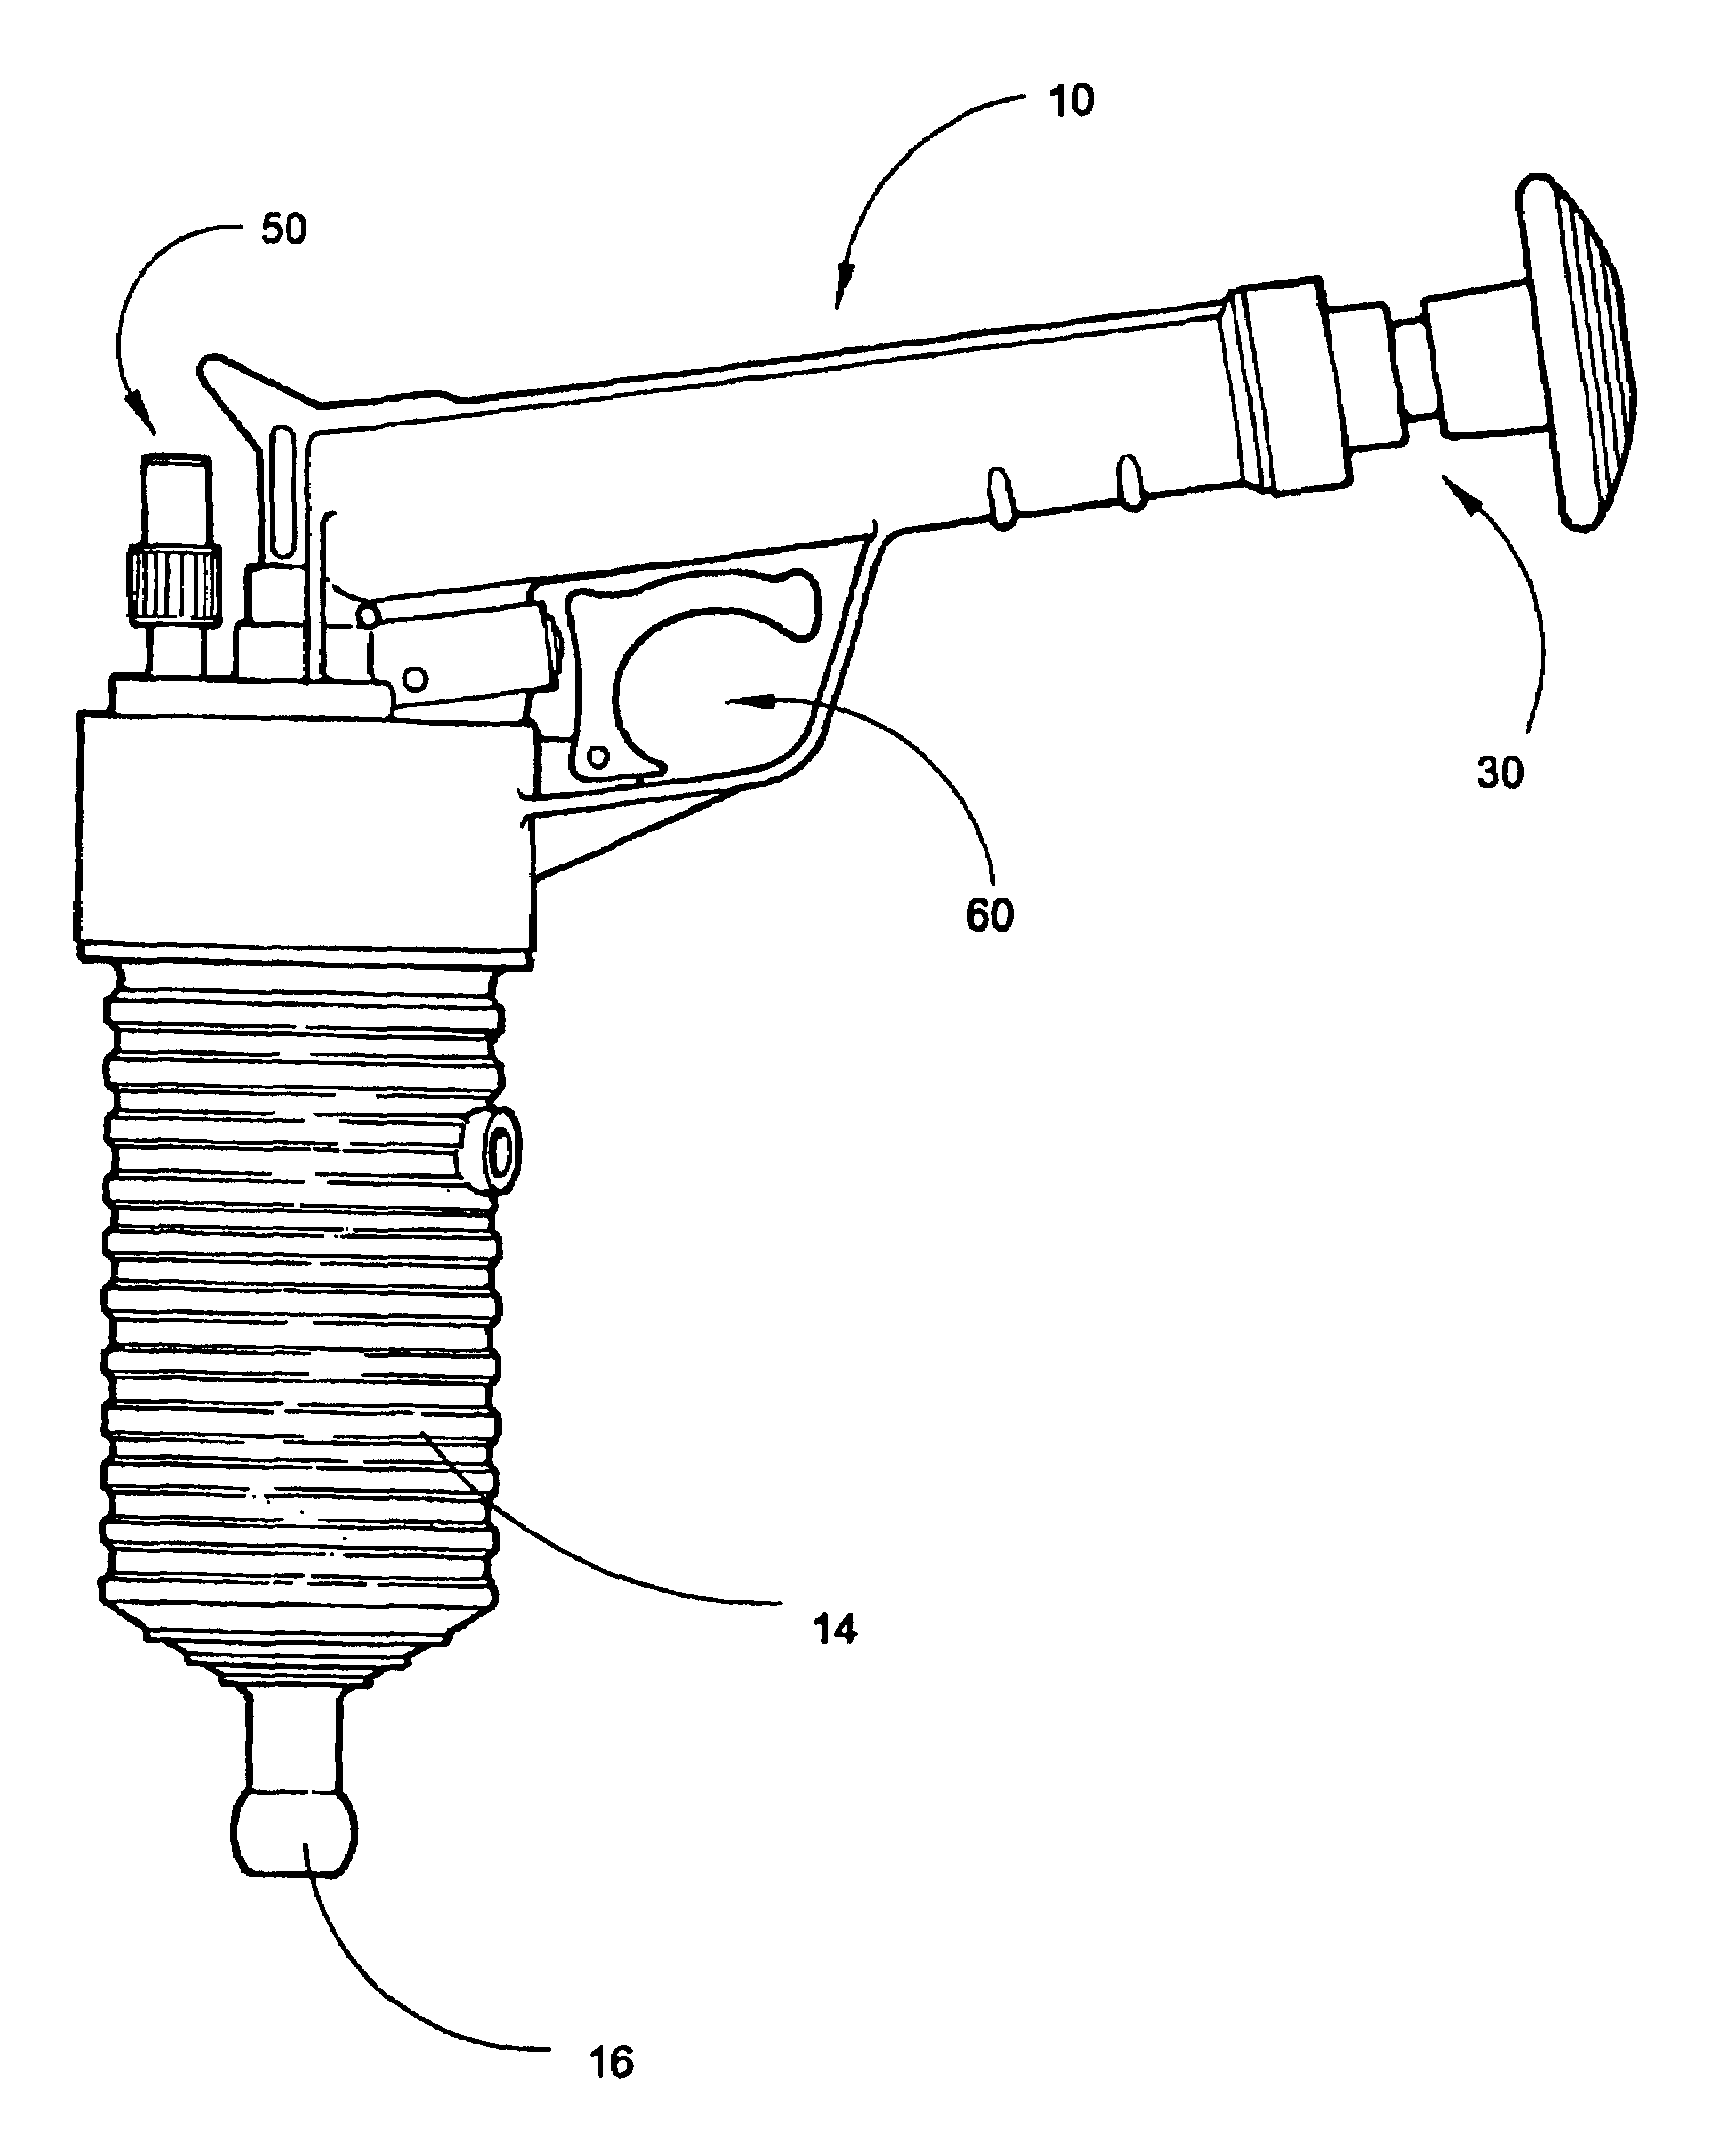 Self-contained handheld drain clearing compressed air device